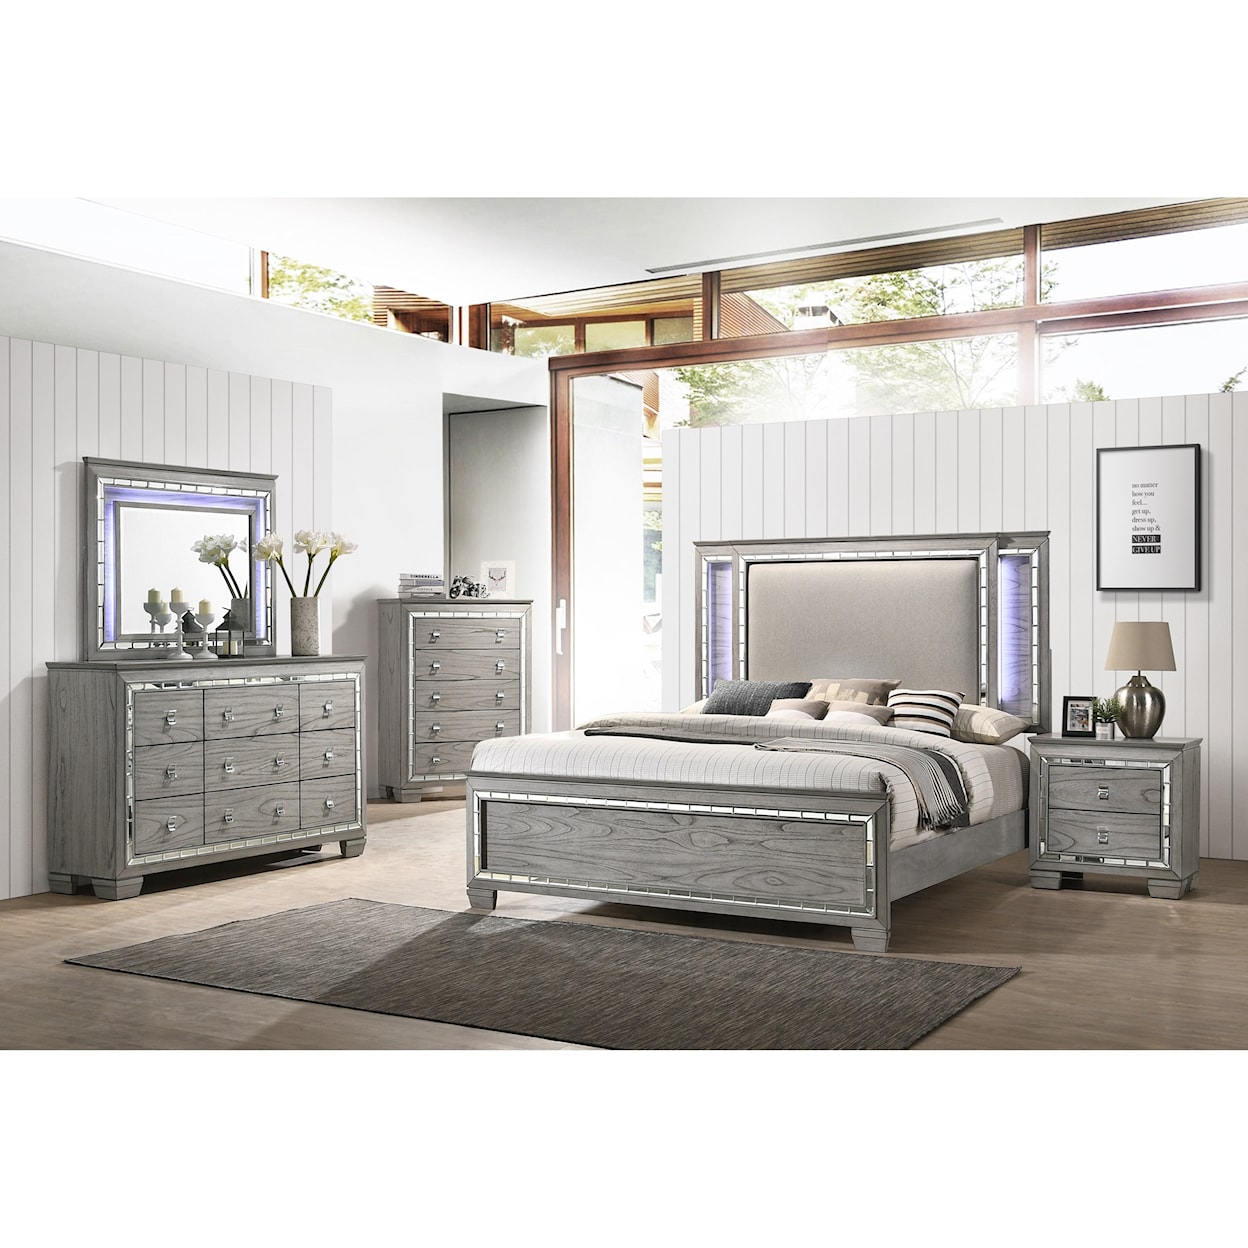 Acme Furniture Antares Queen Bed (LED HB)